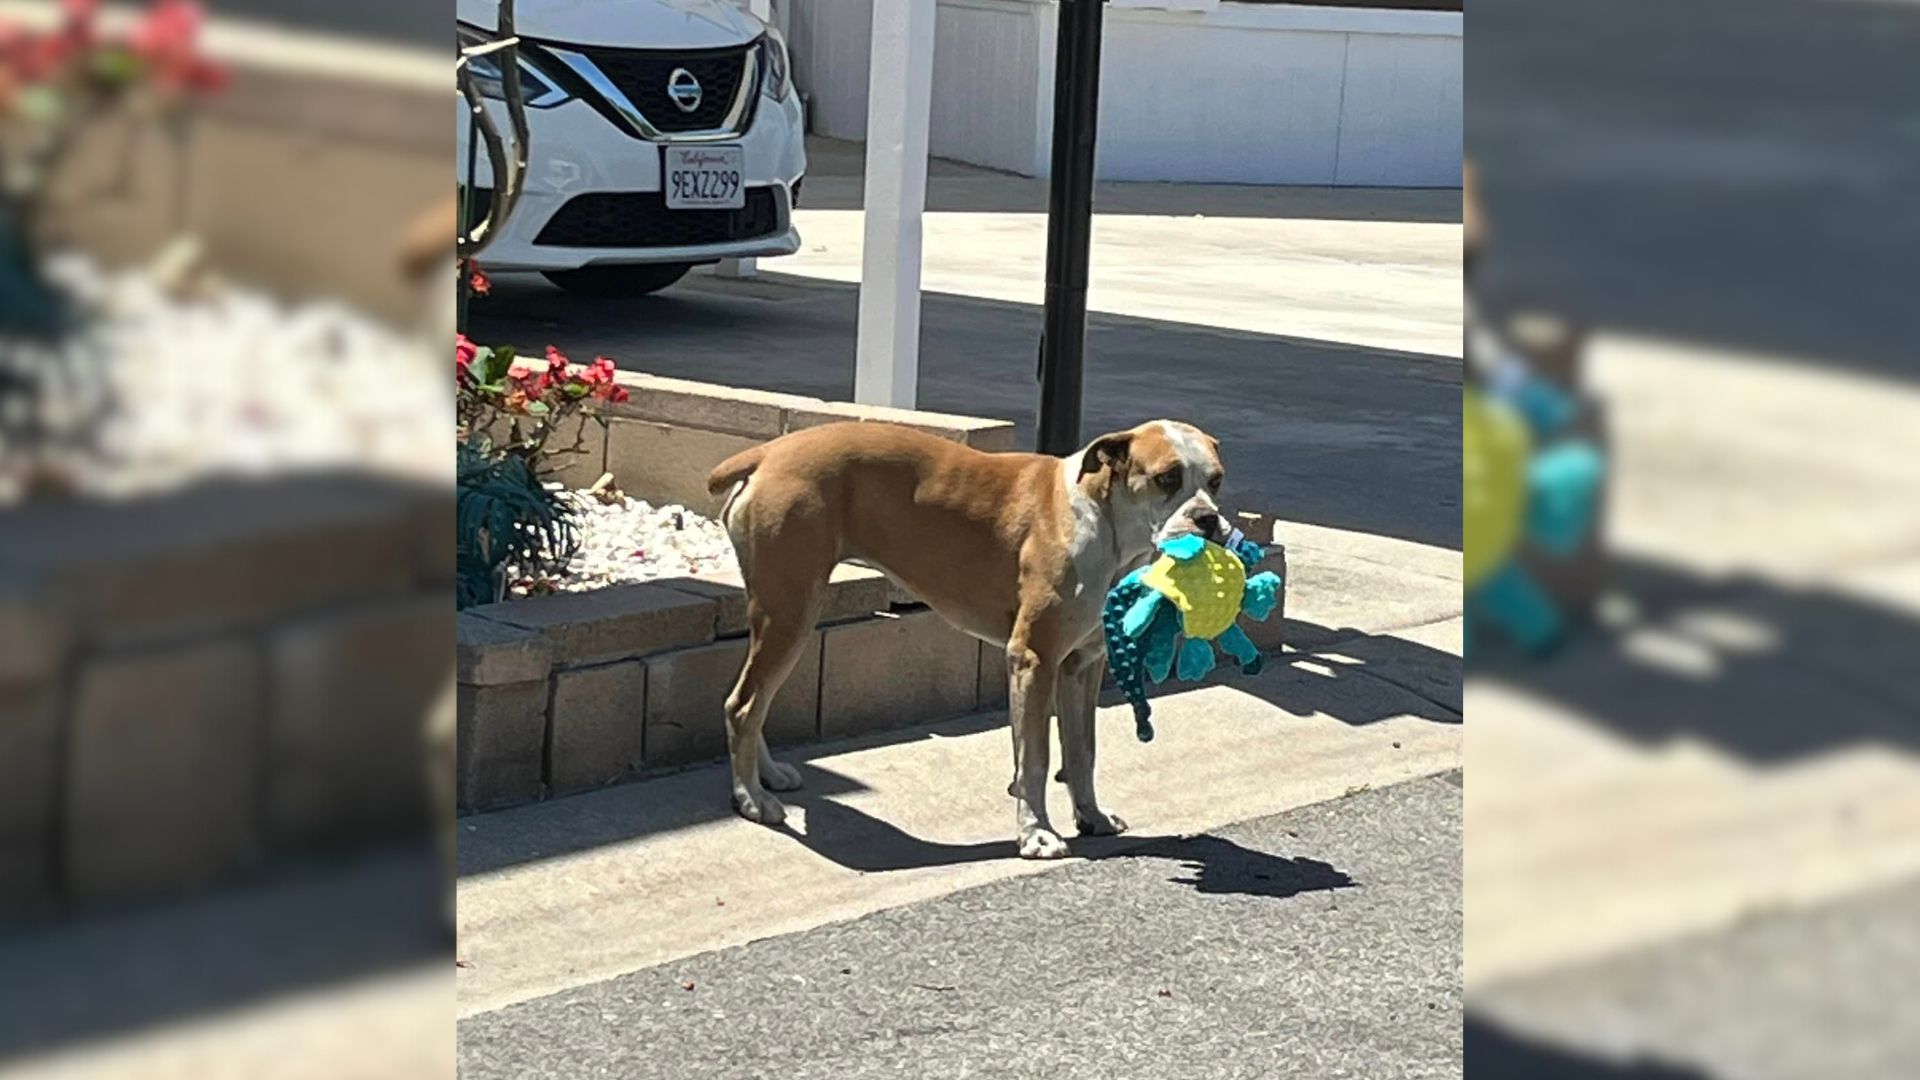 Frightened Stray Dog Finds Comfort In Plush Toys His Rescuers Gave Him 